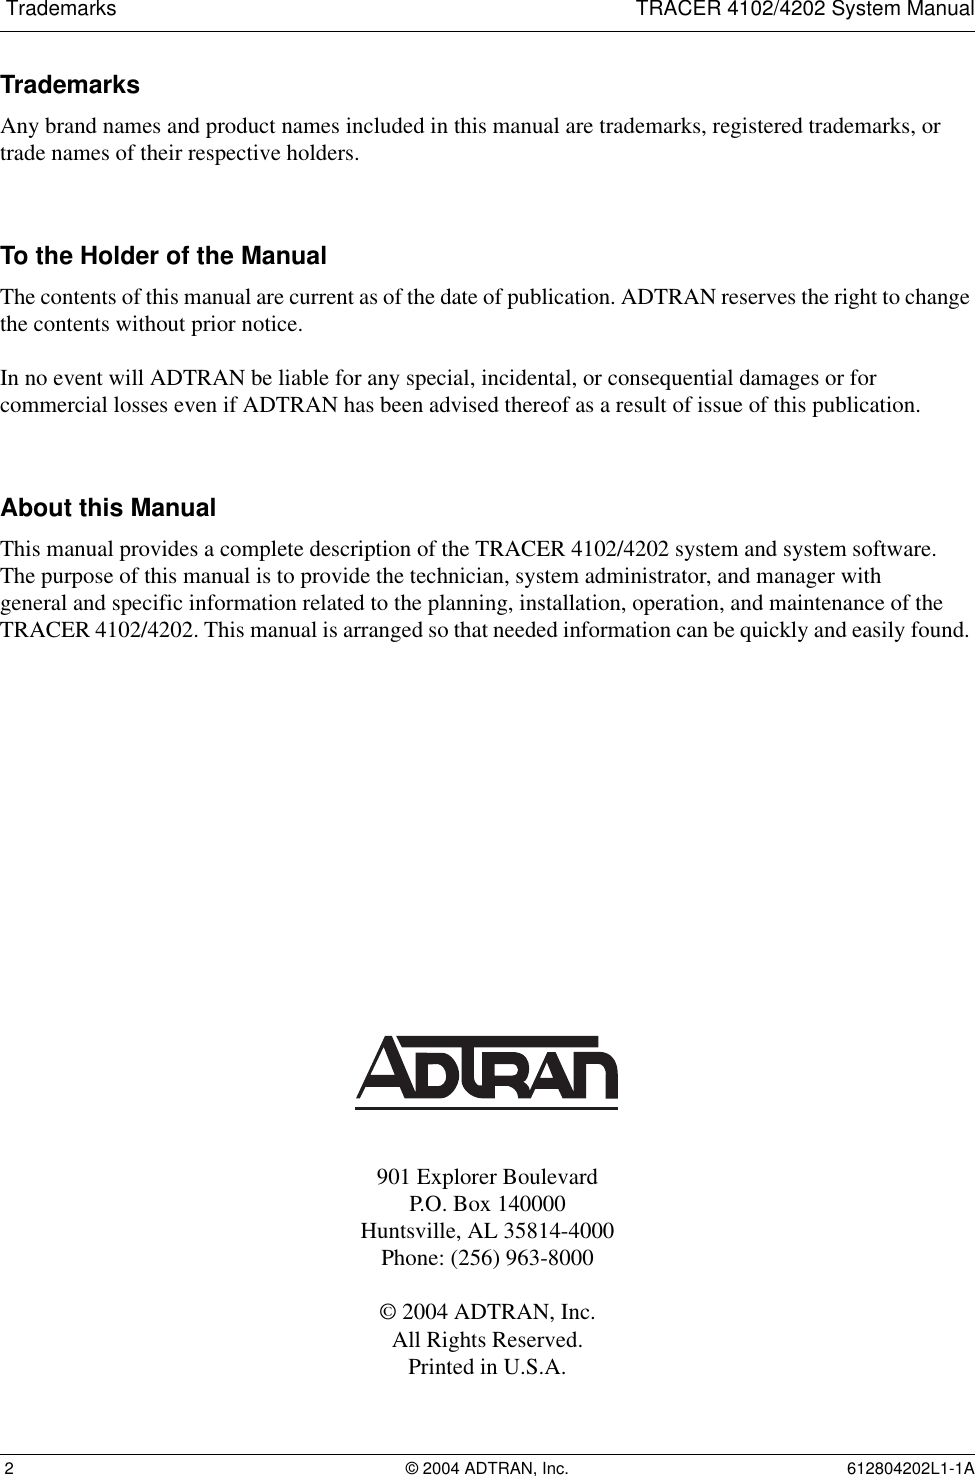  Trademarks TRACER 4102/4202 System Manual 2 © 2004 ADTRAN, Inc. 612804202L1-1ATrademarksAny brand names and product names included in this manual are trademarks, registered trademarks, or trade names of their respective holders.To the Holder of the ManualThe contents of this manual are current as of the date of publication. ADTRAN reserves the right to change the contents without prior notice.In no event will ADTRAN be liable for any special, incidental, or consequential damages or for commercial losses even if ADTRAN has been advised thereof as a result of issue of this publication.About this ManualThis manual provides a complete description of the TRACER 4102/4202 system and system software.The purpose of this manual is to provide the technician, system administrator, and manager withgeneral and specific information related to the planning, installation, operation, and maintenance of the TRACER 4102/4202. This manual is arranged so that needed information can be quickly and easily found. 901 Explorer BoulevardP.O. Box 140000Huntsville, AL 35814-4000Phone: (256) 963-8000© 2004 ADTRAN, Inc.All Rights Reserved.Printed in U.S.A.